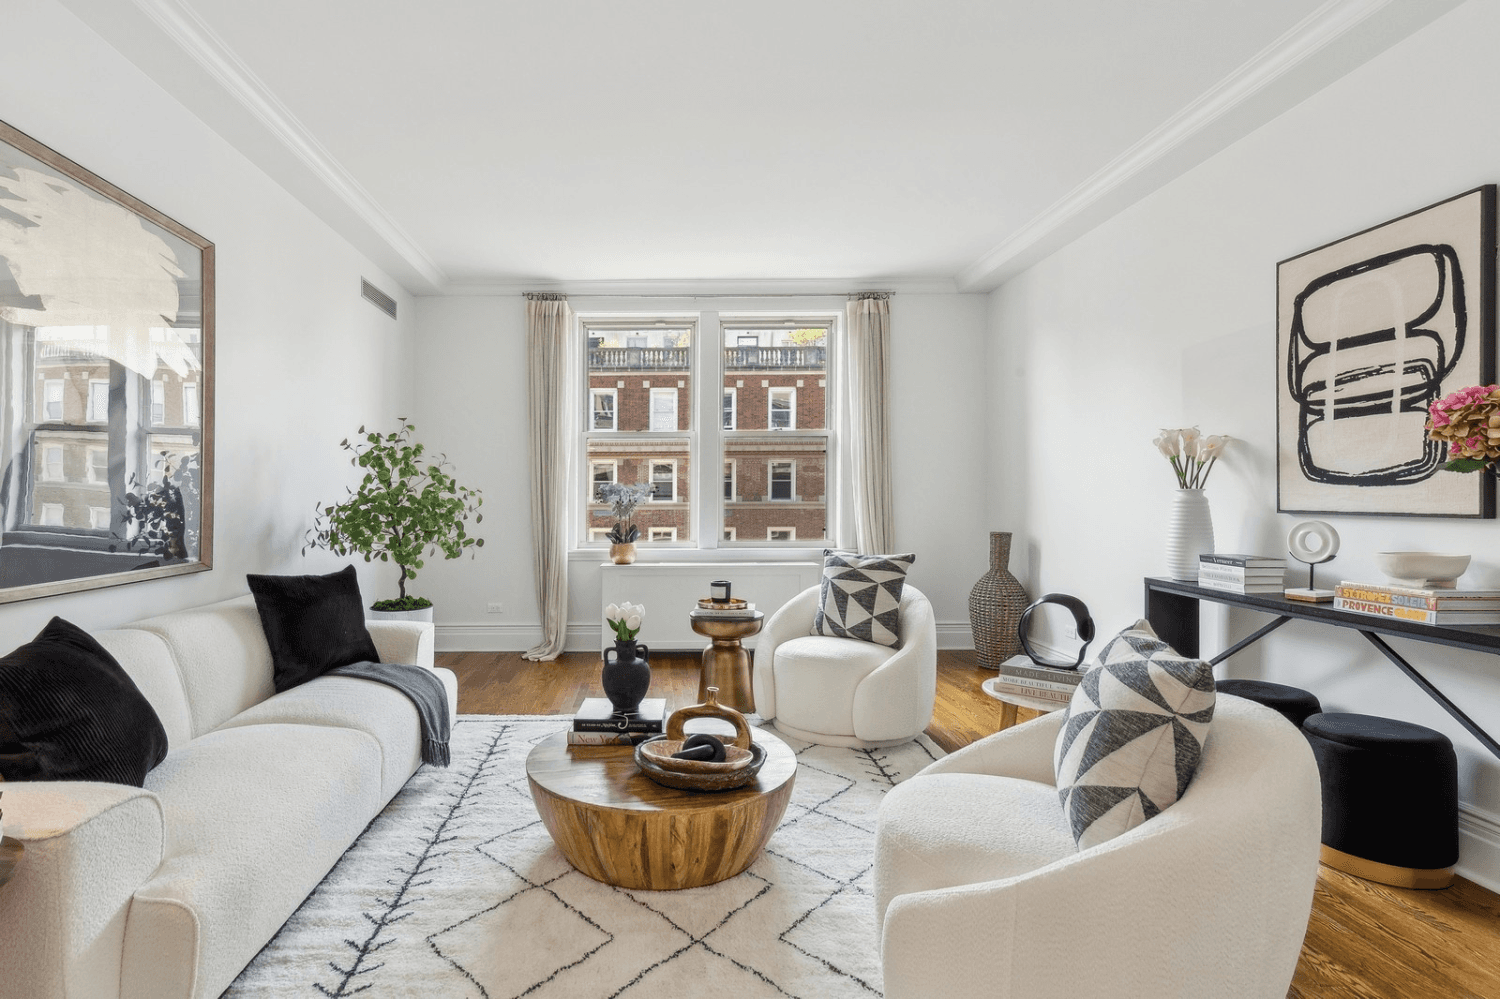 1150 Fifth Avenue, D14Central Park Views and Pre War Charm on Museum MileLuxurious Central Park living awaits in this sun splashed3 bedroom, 2 bathroom co op with three exposures and ...